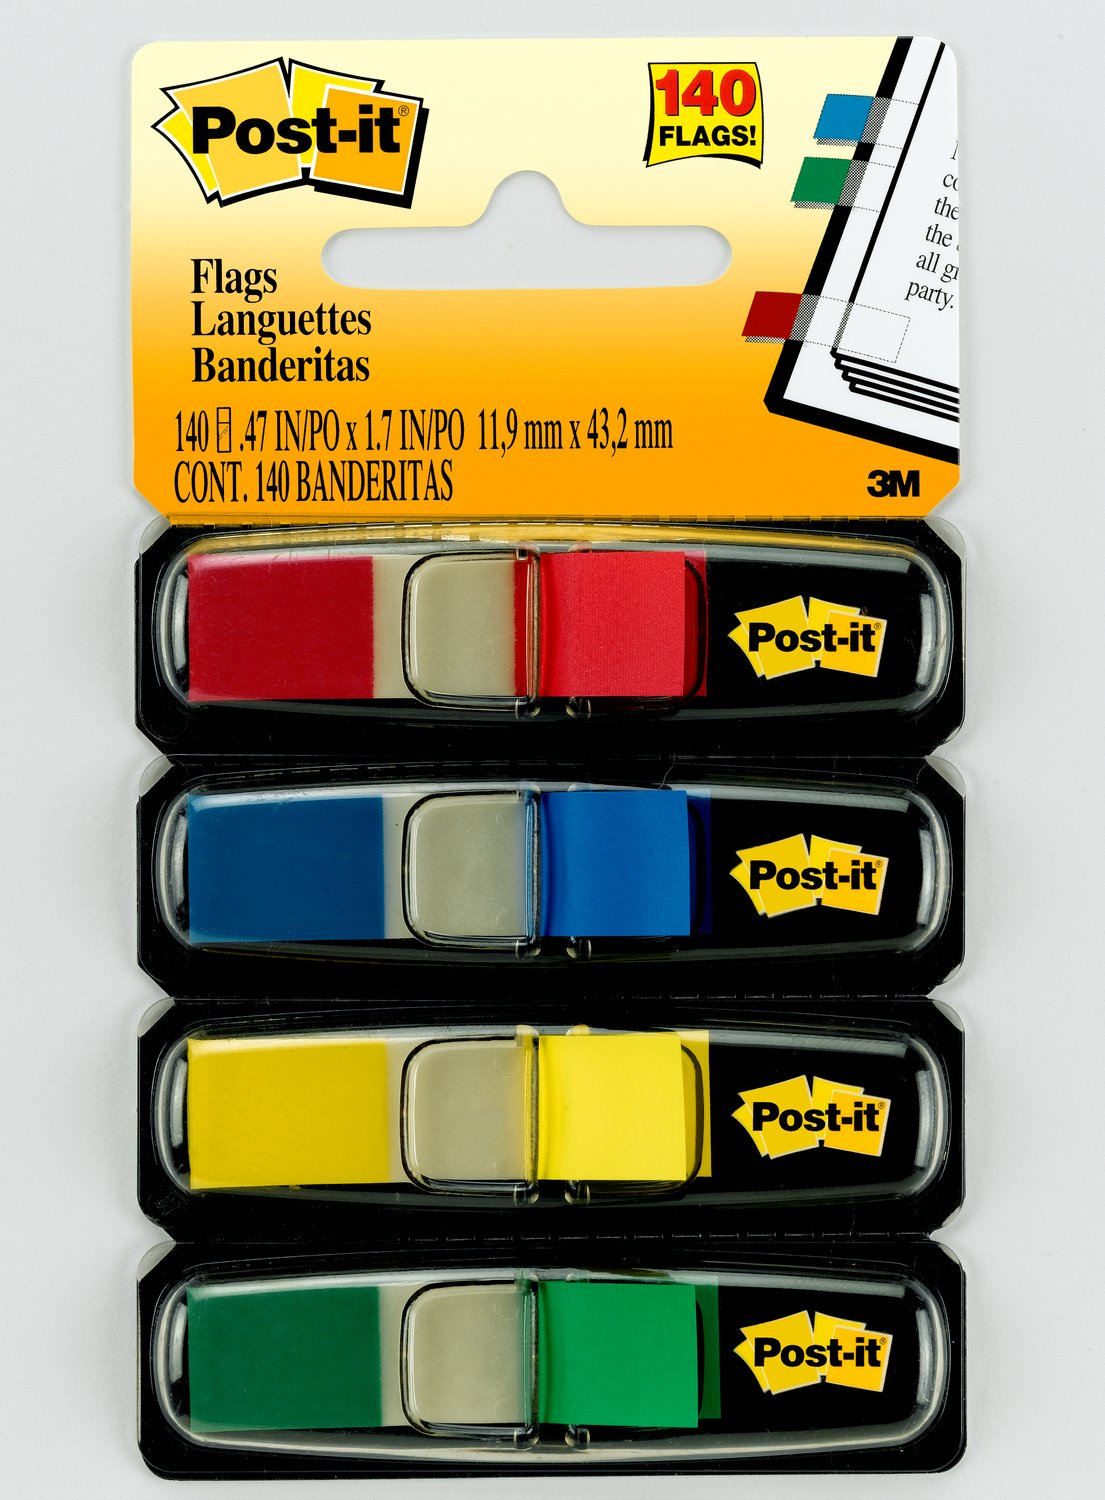 7000144922 - Post-it Flags 683-4, 4 Colors, 0.47 in x 1.7 in, 6 Pack/Carton, 4 Carton/Case